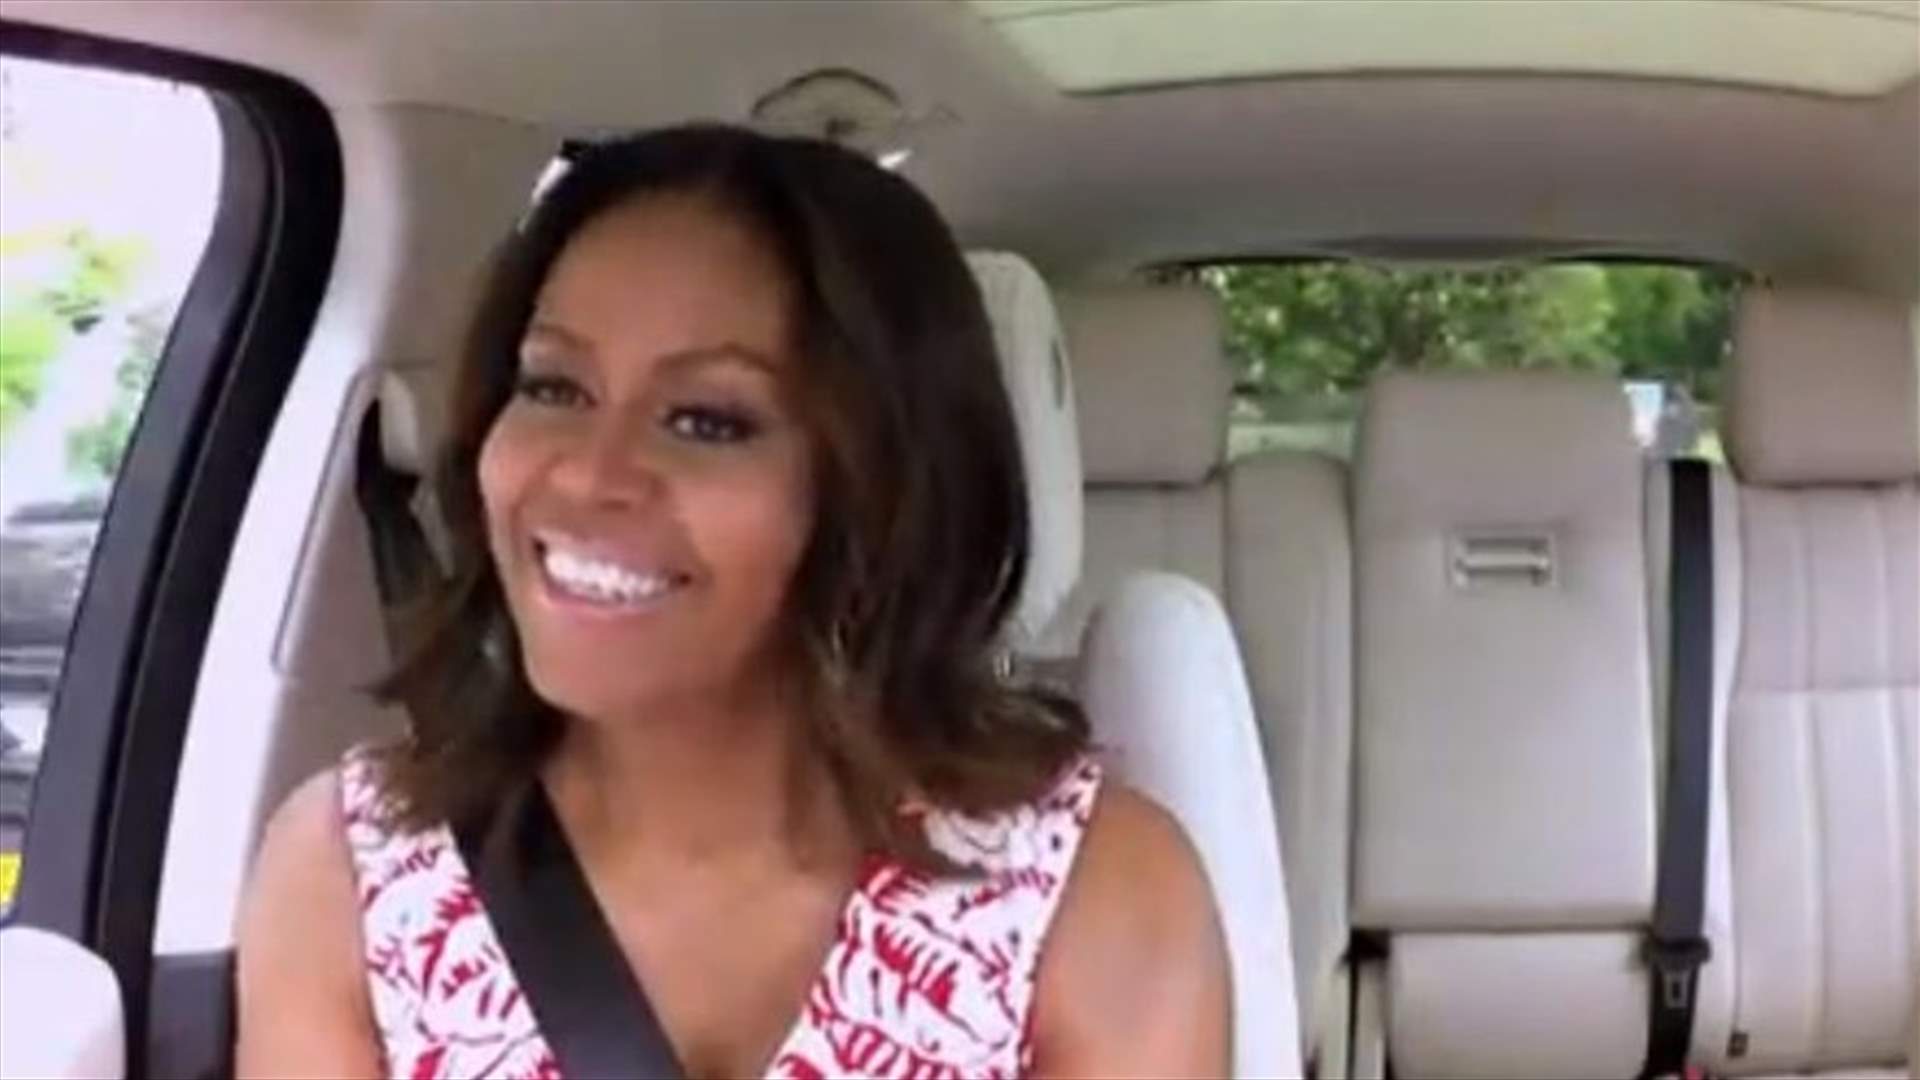 [VIDEO] First Lady, James Corden Hit The Road For &#39;Carpool Karaoke&#39;